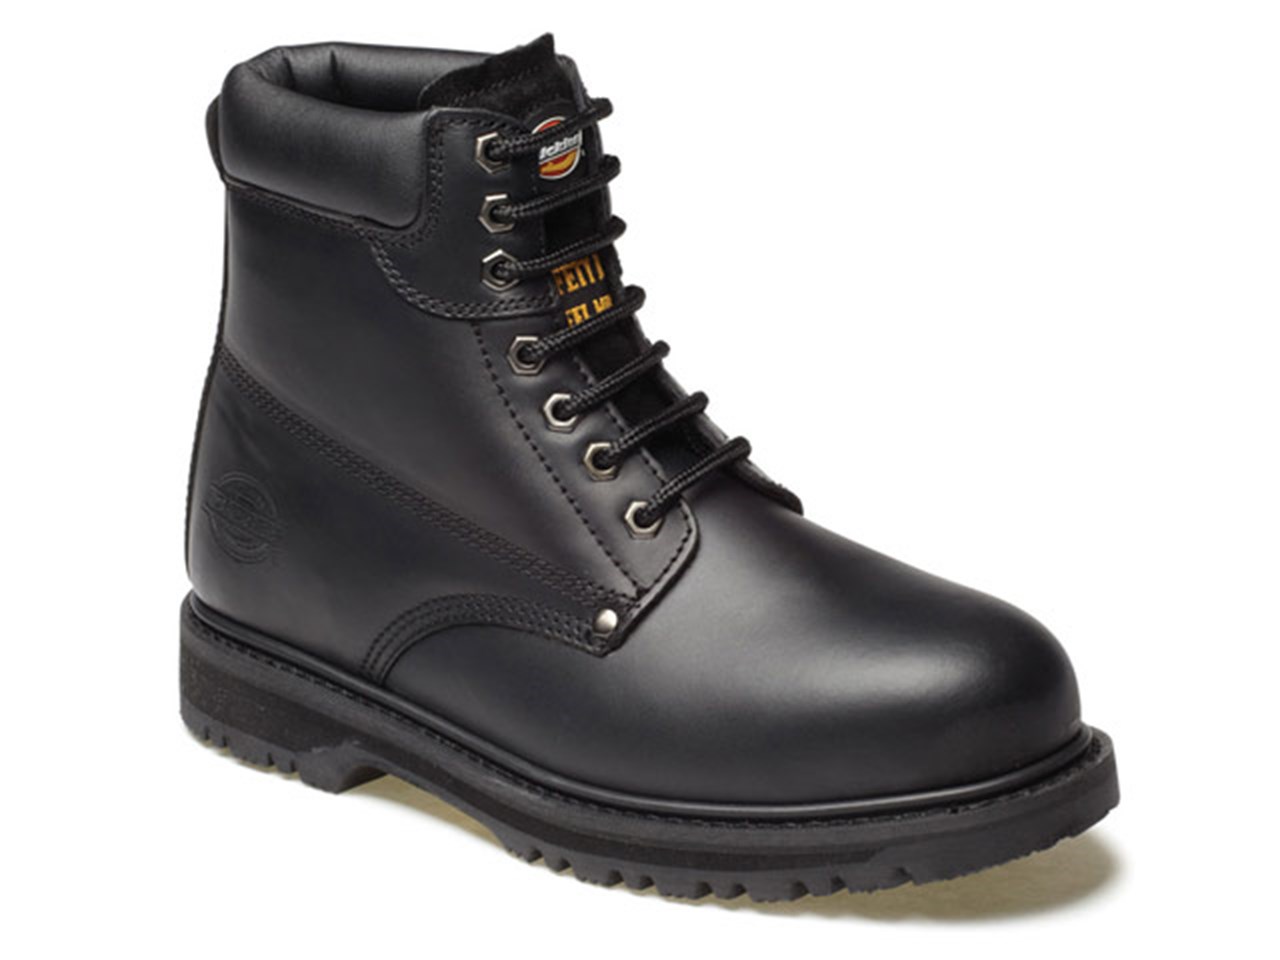 Dickies FA23200 BK 9 Cleveland Super Safety Boot Black Size 9